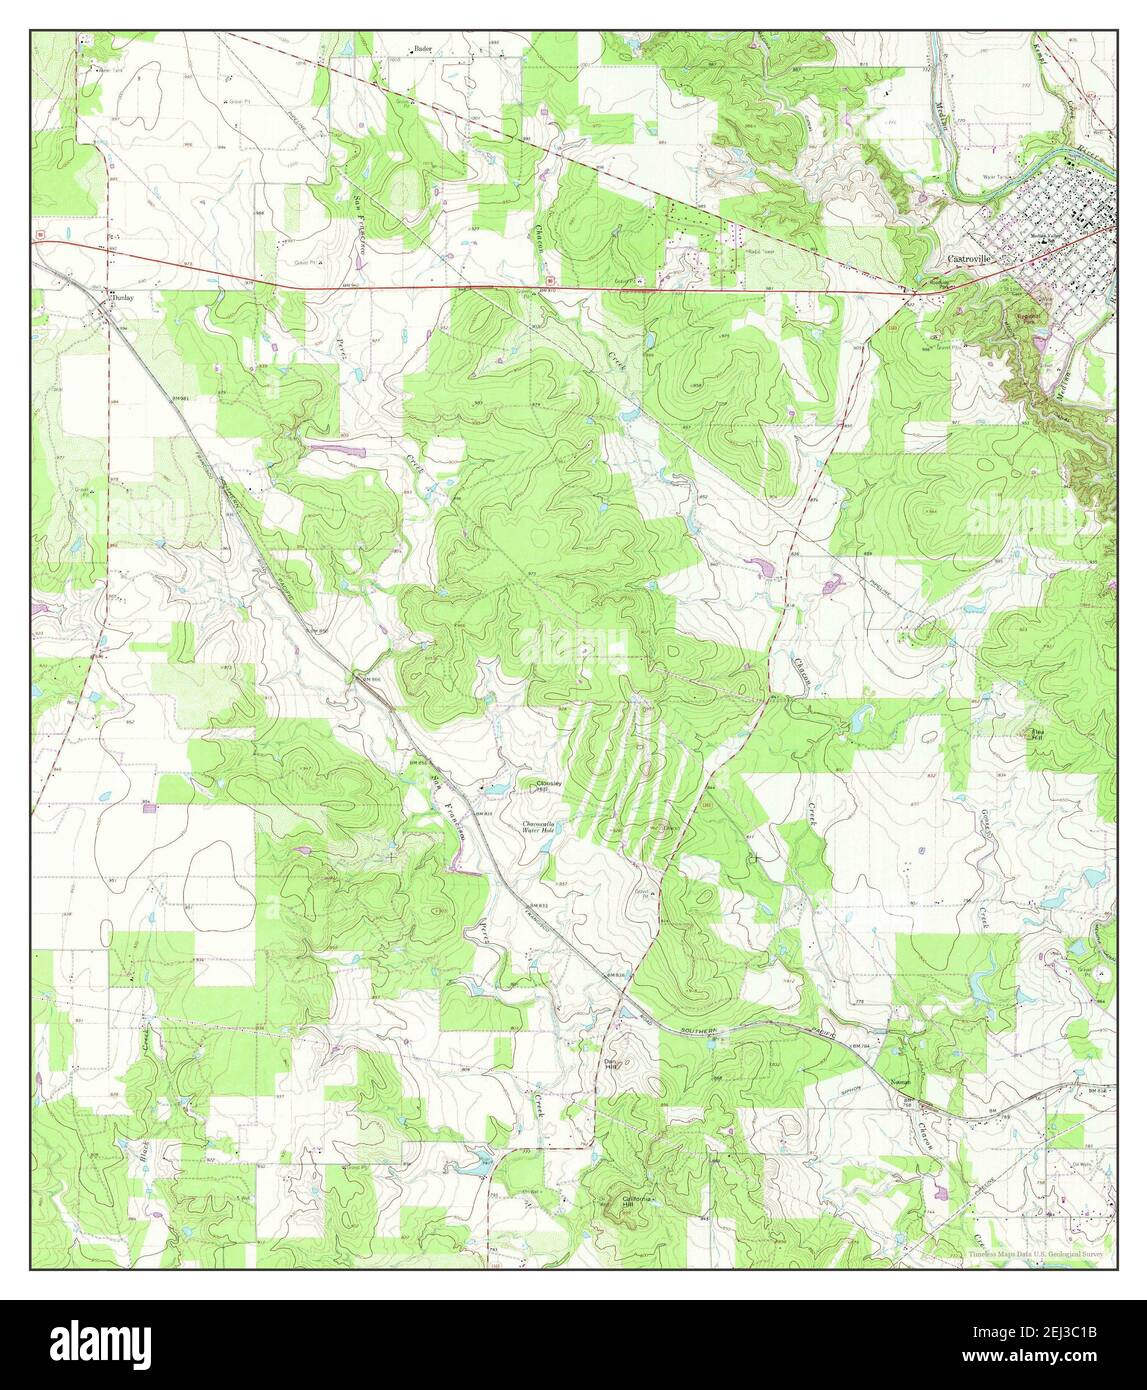 Castroville, Texas, map 1964, 1:24000, United States of America by Timeless Maps, data U.S. Geological Survey Stock Photo